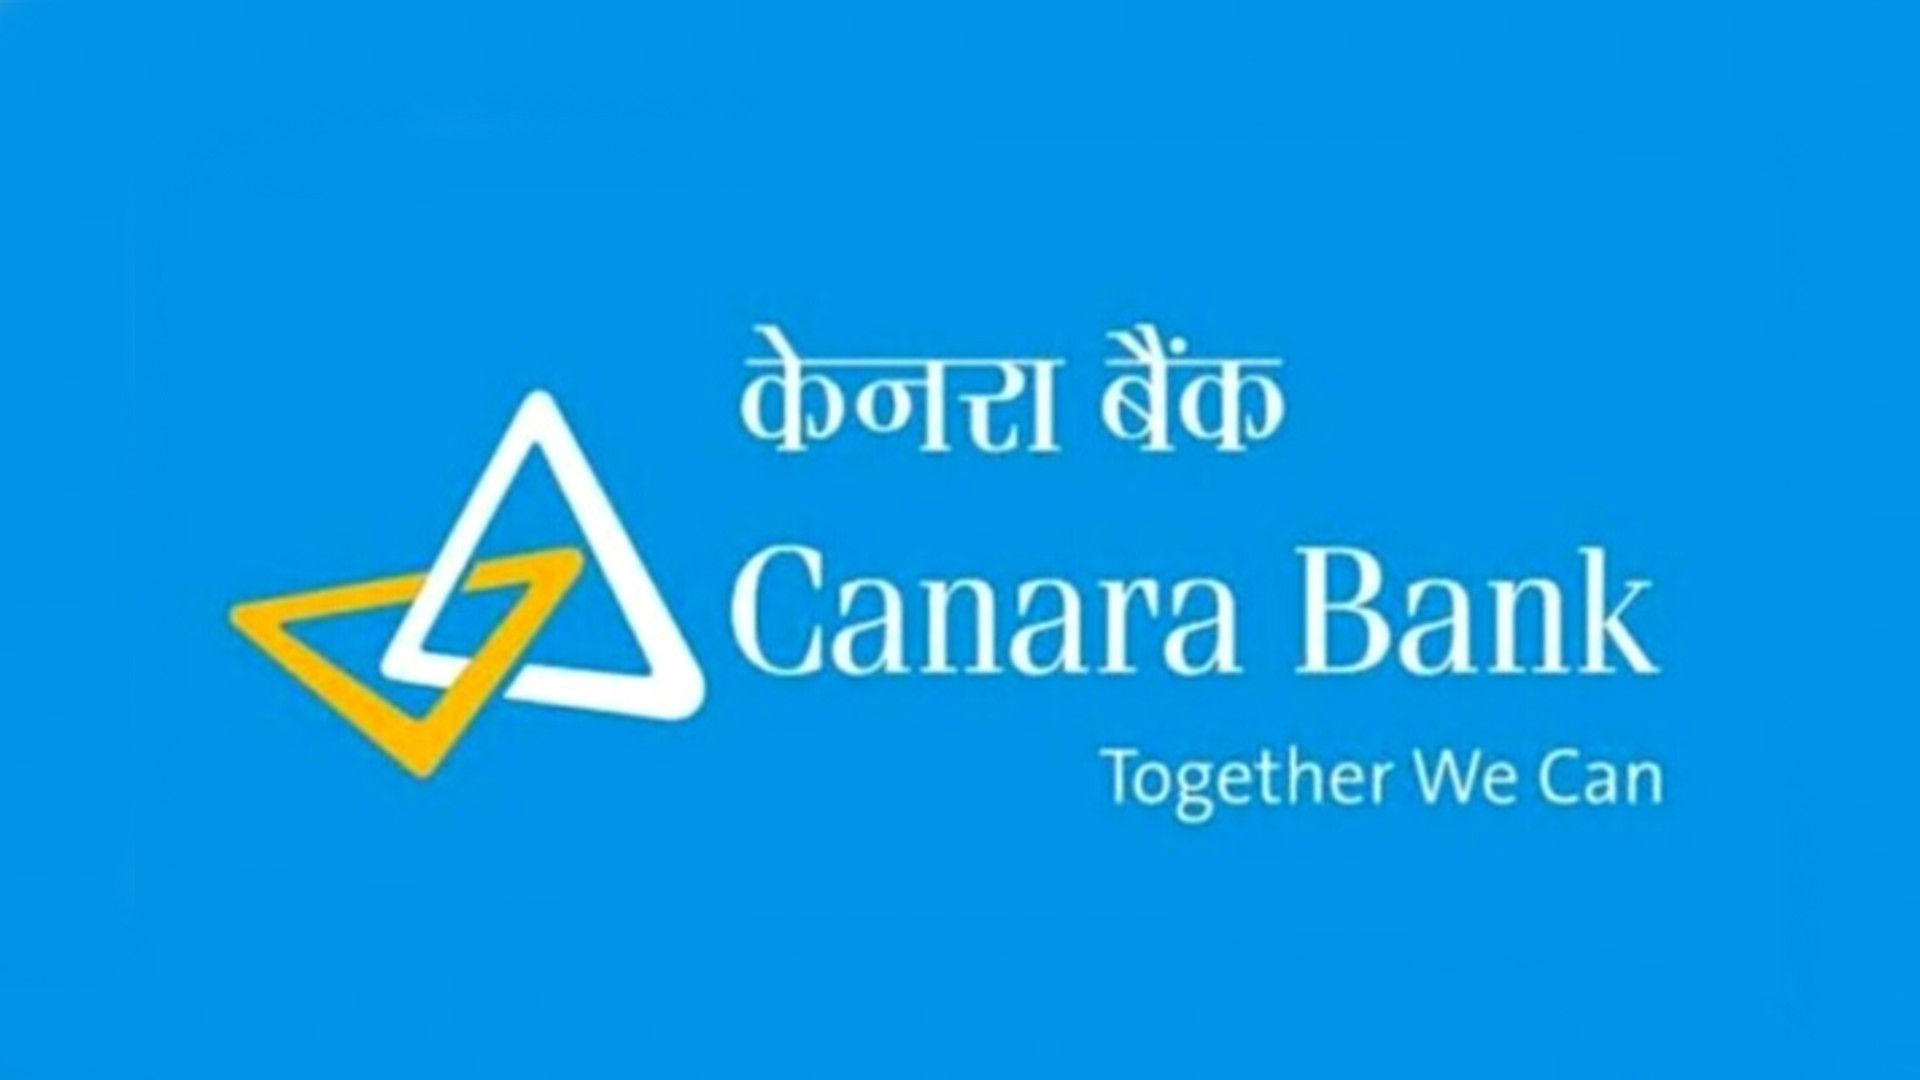 Canara Bank to raise Rs. 9,000 Crore by way of Equity and Debt Instruments